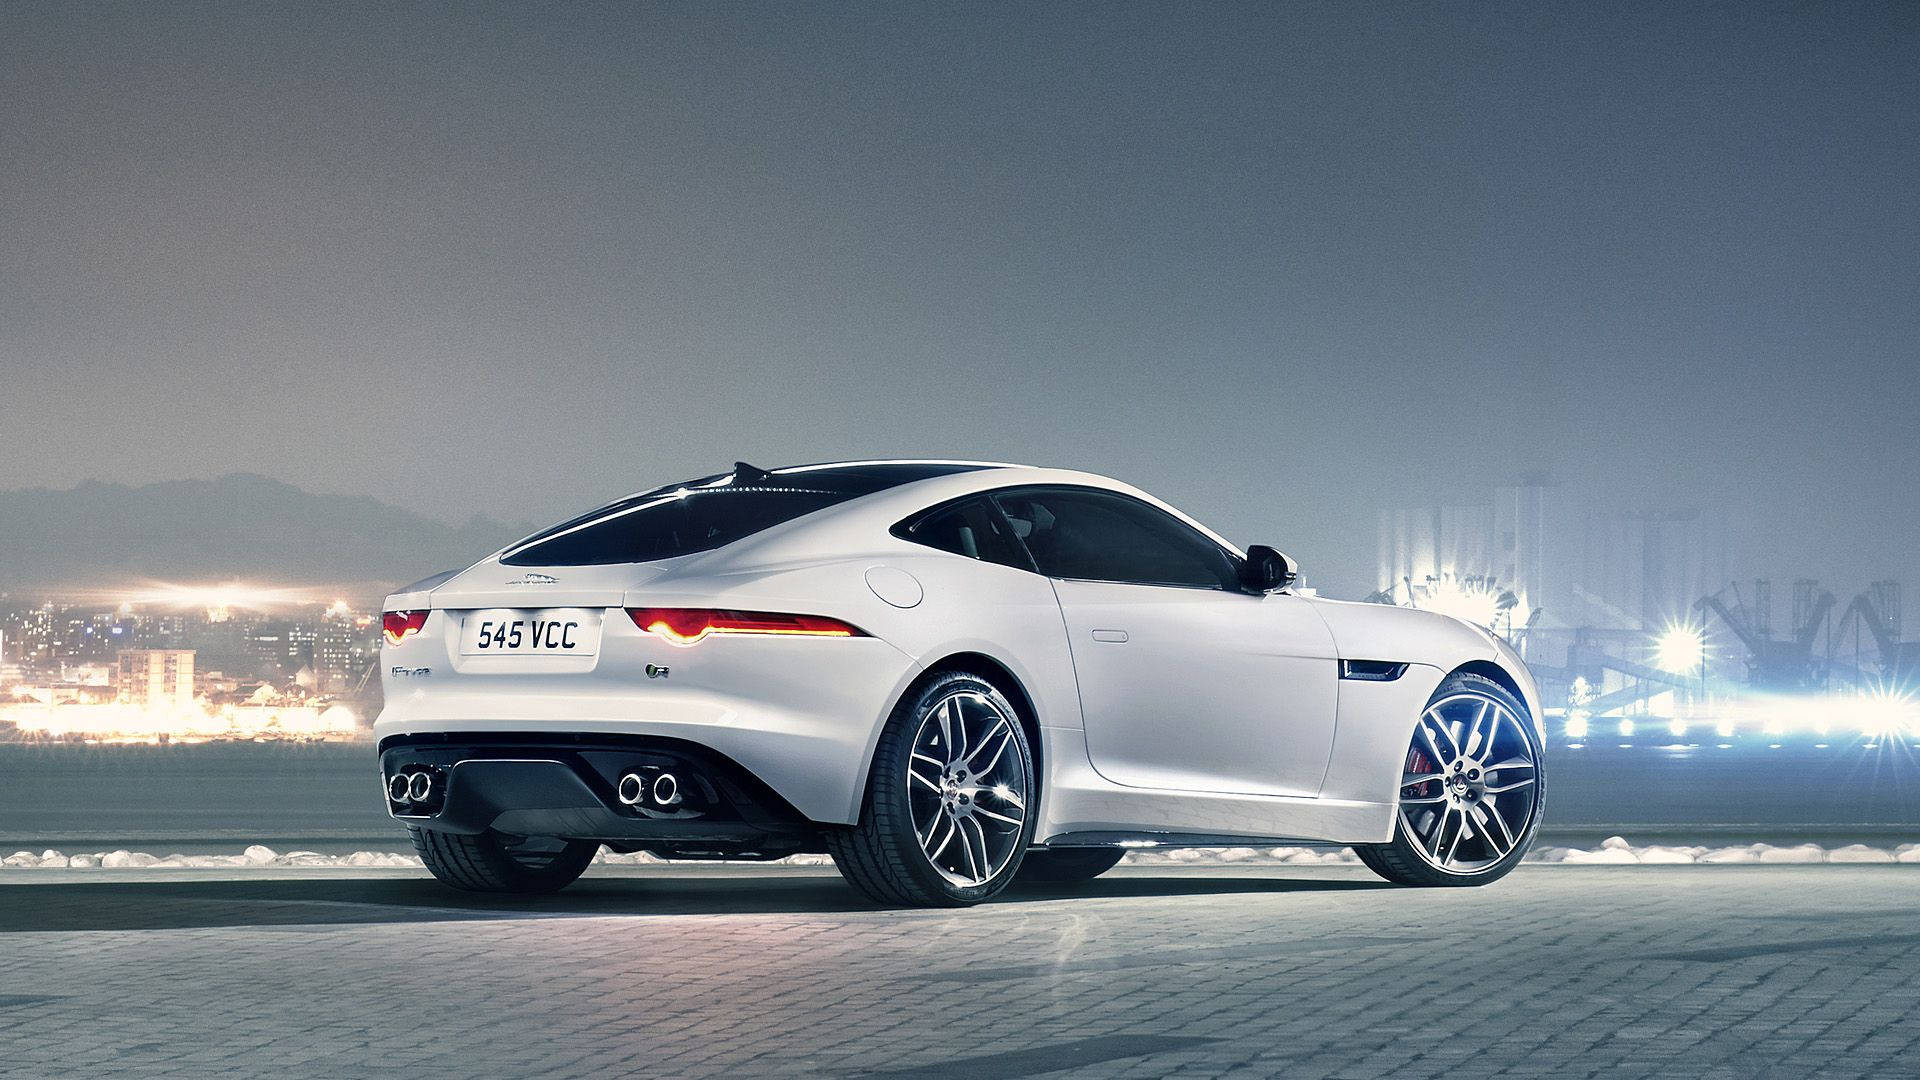 Speed Into The Night With This Sleek, Silver Jaguar Car Background